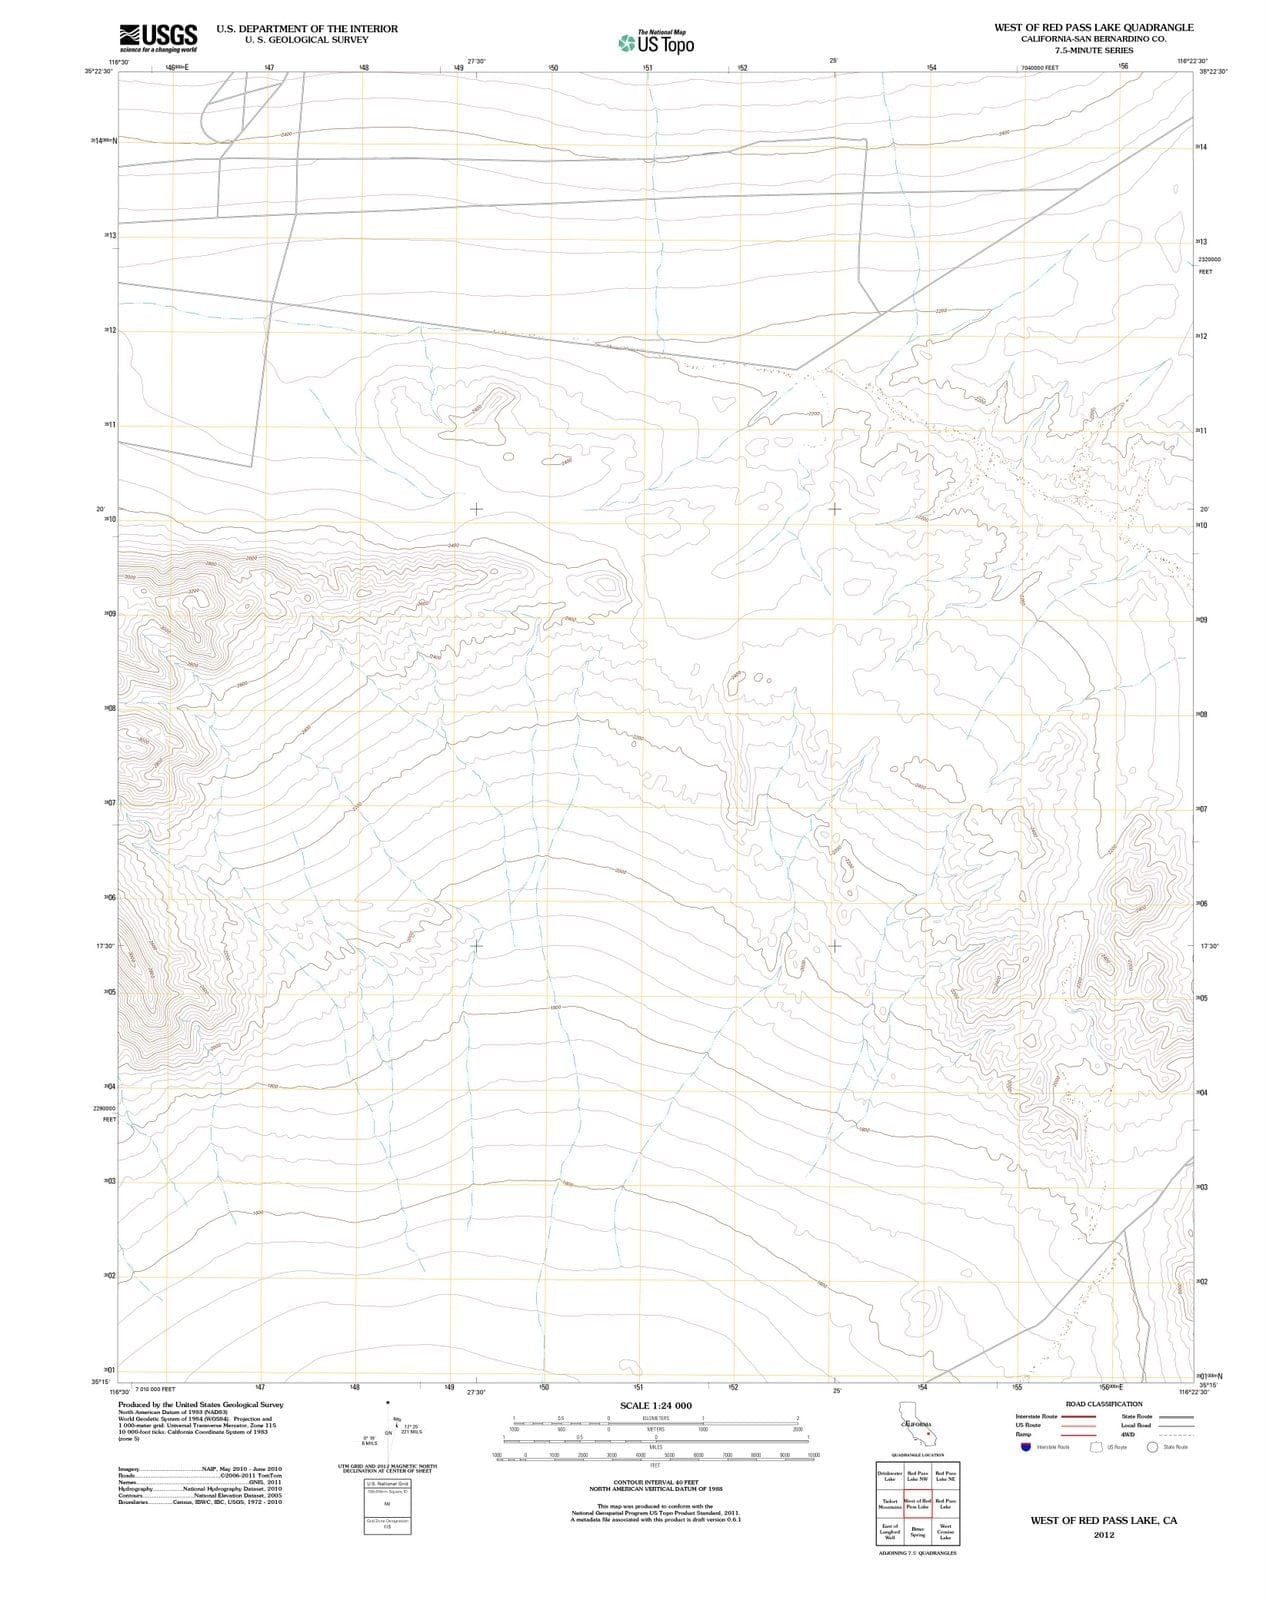 2012 West of Red Pass Lake, CA - California - USGS Topographic Map